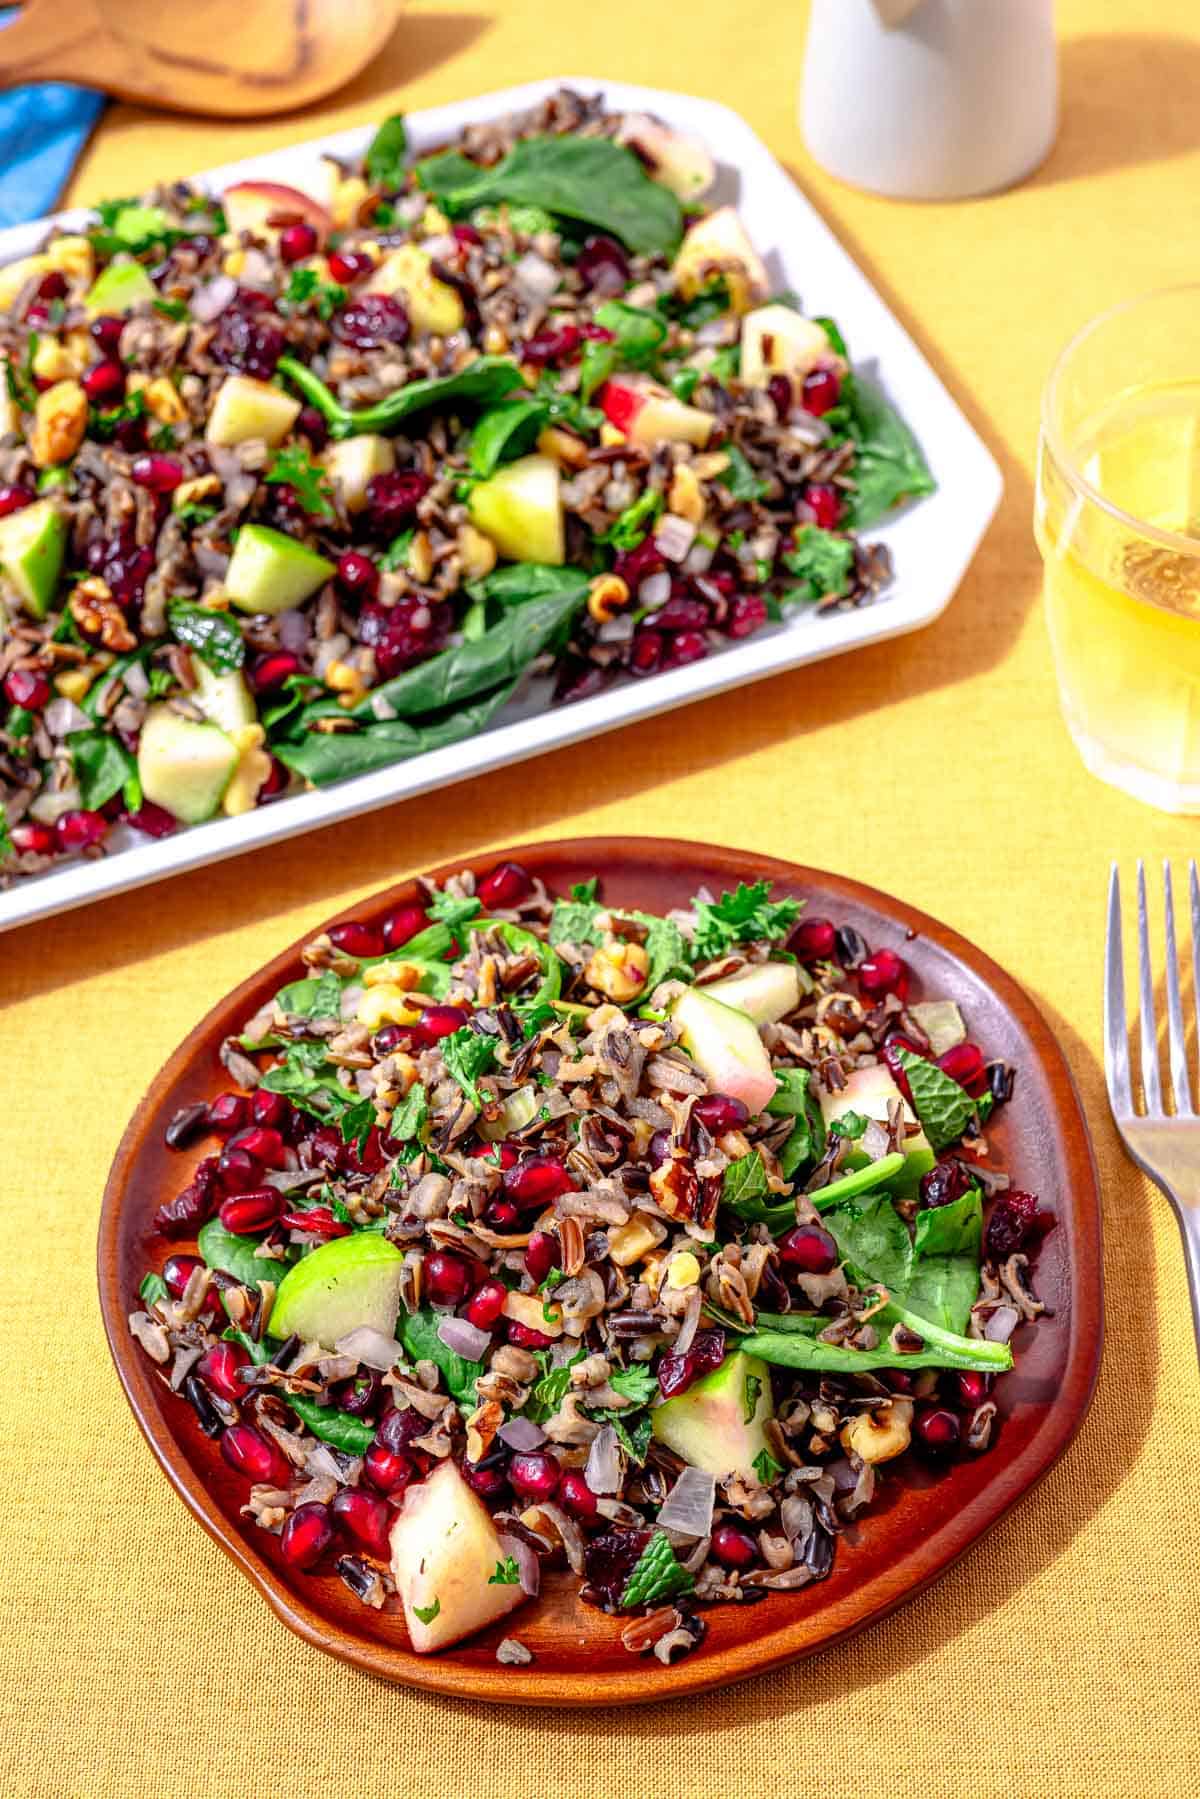 serving of wild rice salad on a plate with a fork and the large platter of salad in the background.